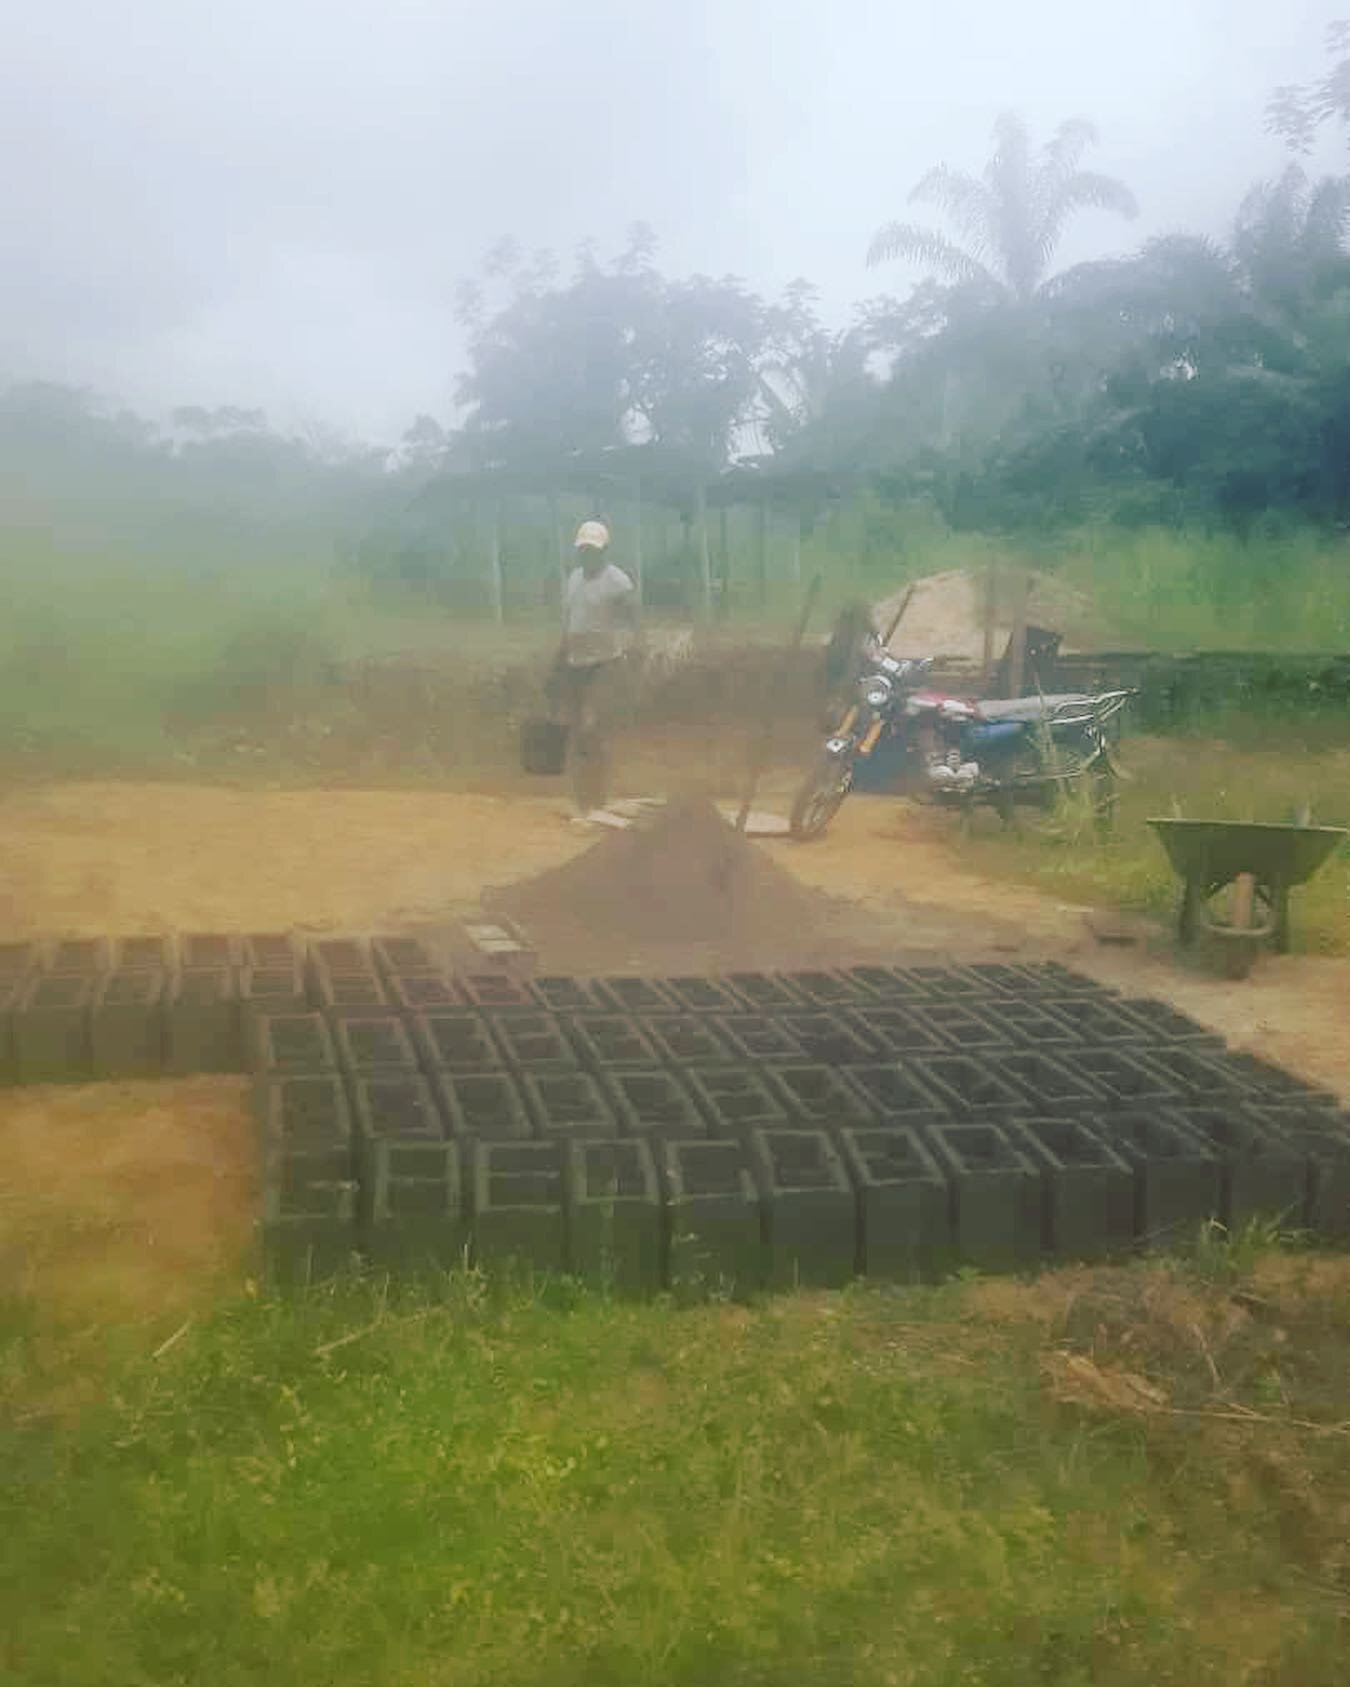 The team has been hard at work building our storage facility in the village of Sypouma. We continue to push through the pandemic #investinagriculture #investinafrica